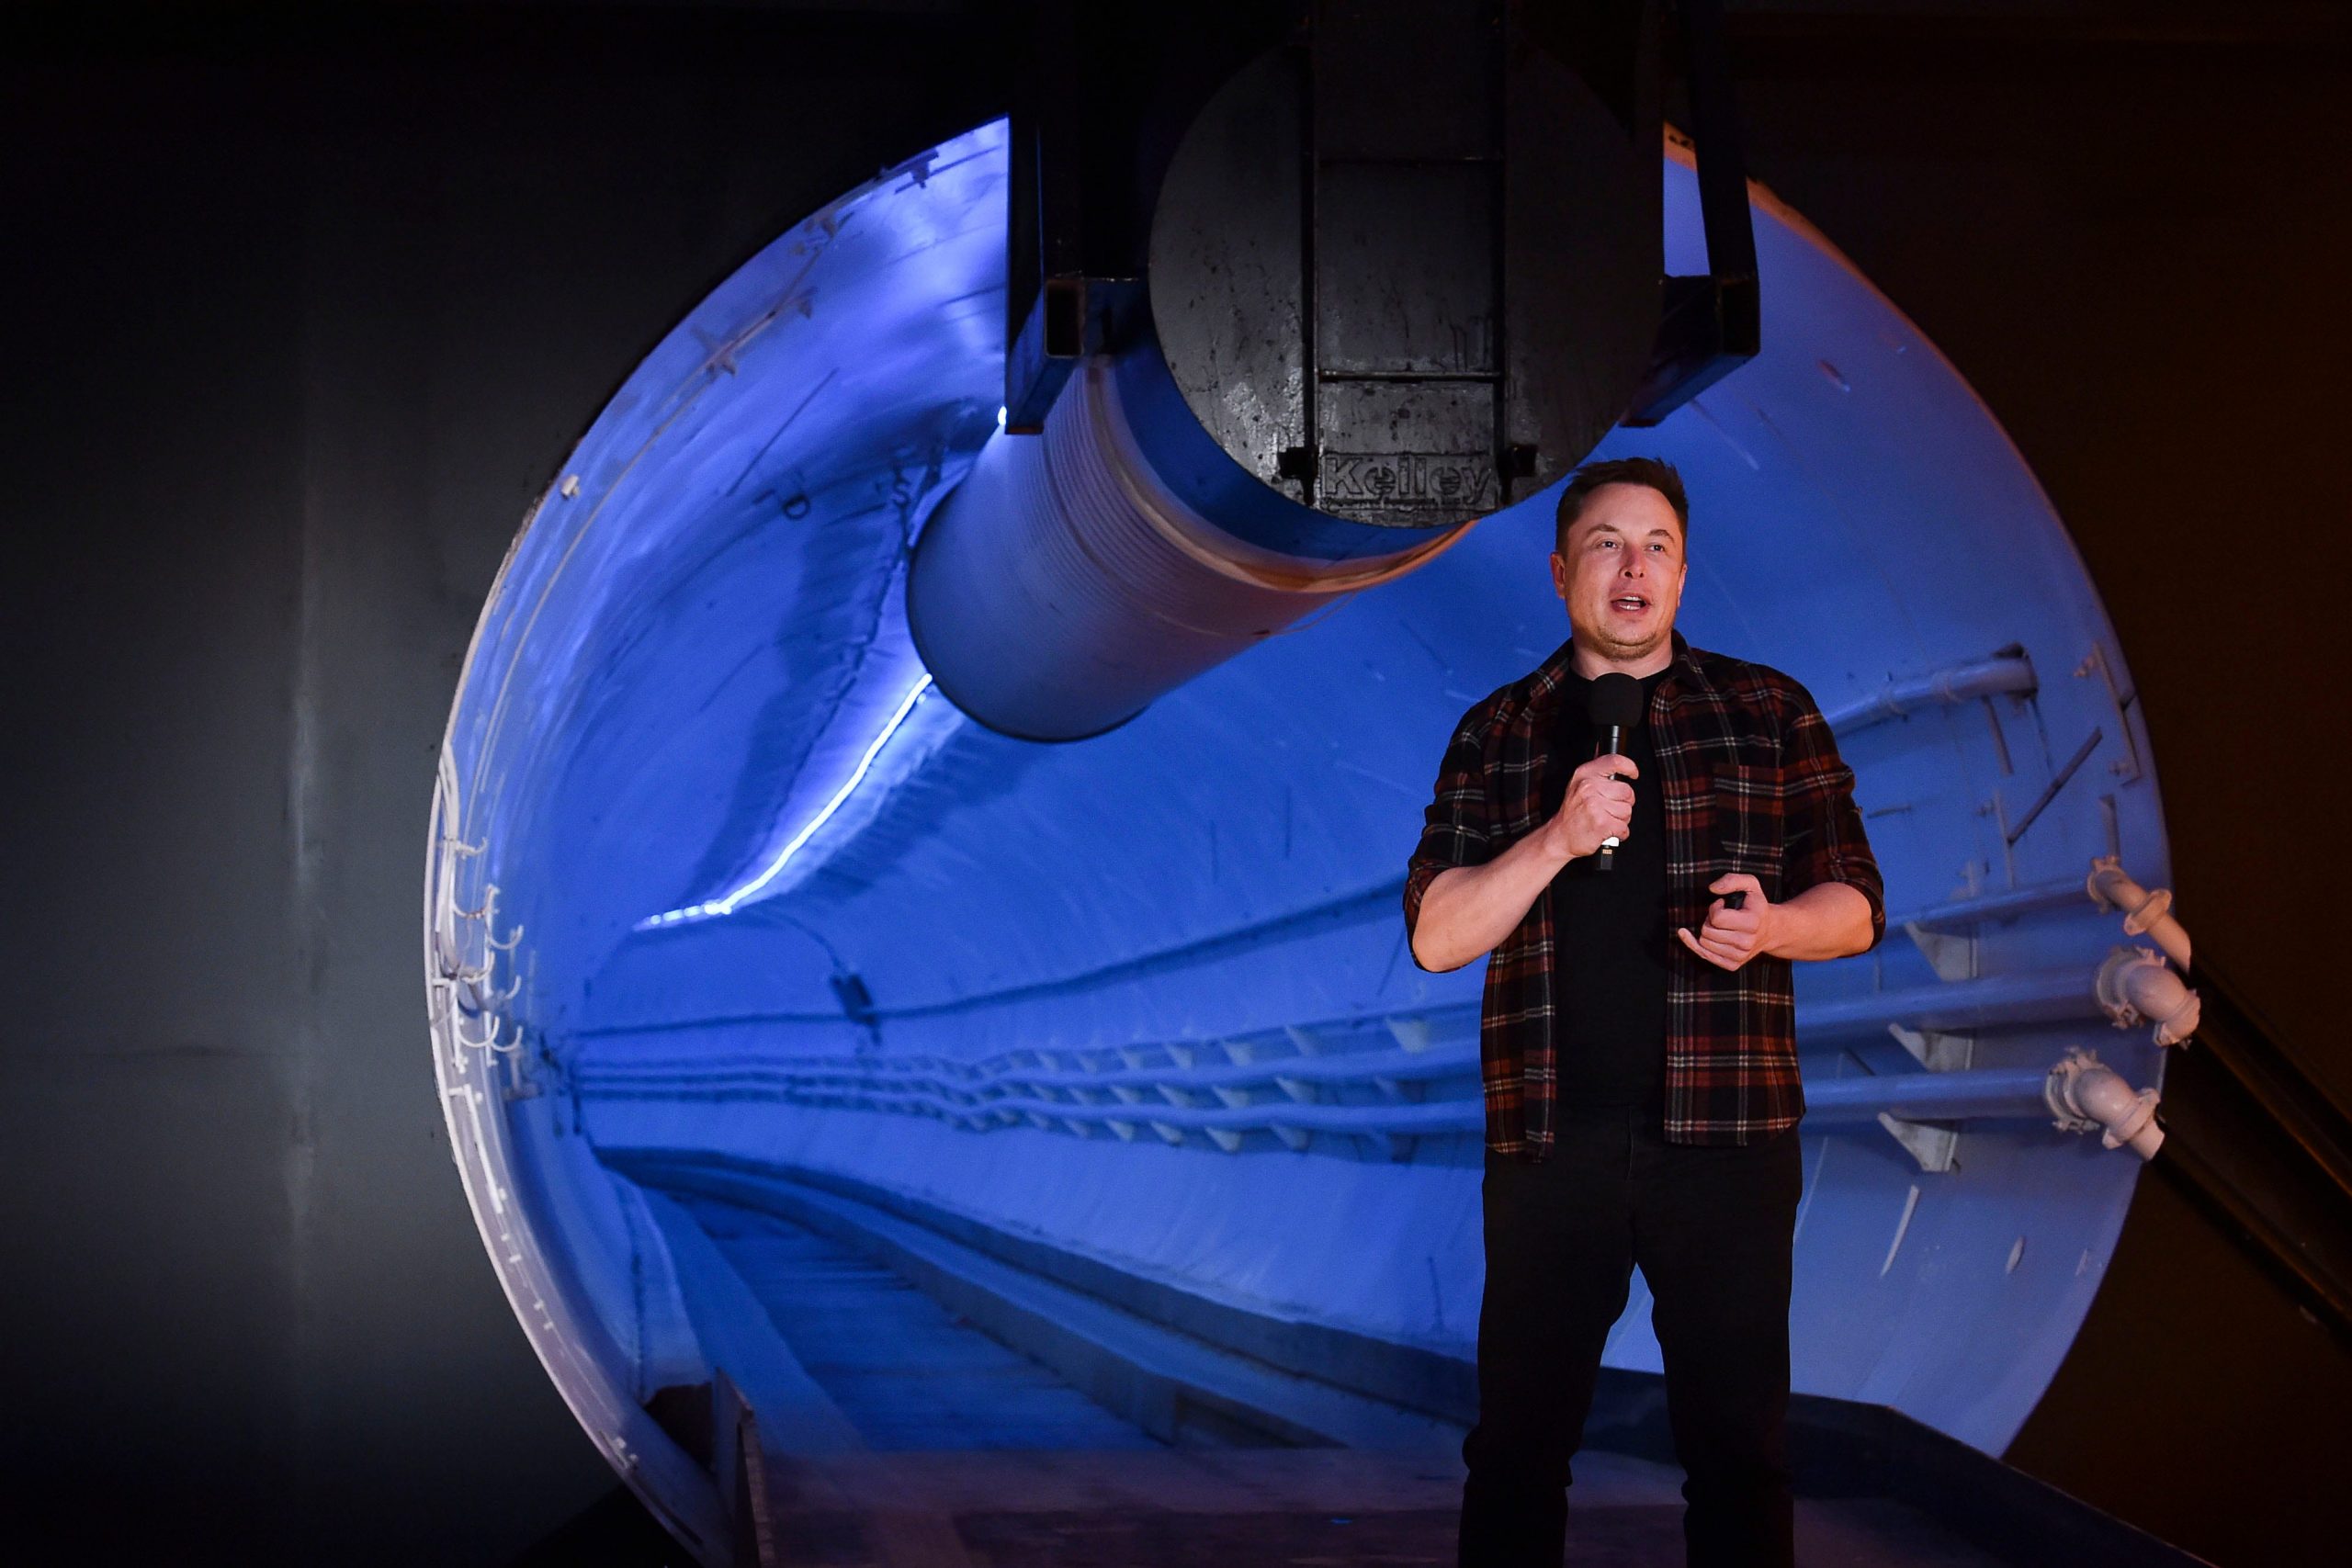 Elon Musk, co-founder and chief executive officer of Tesla Inc., speaks during an unveiling event for the Boring Company Hawthorne test tunnel in Hawthorne